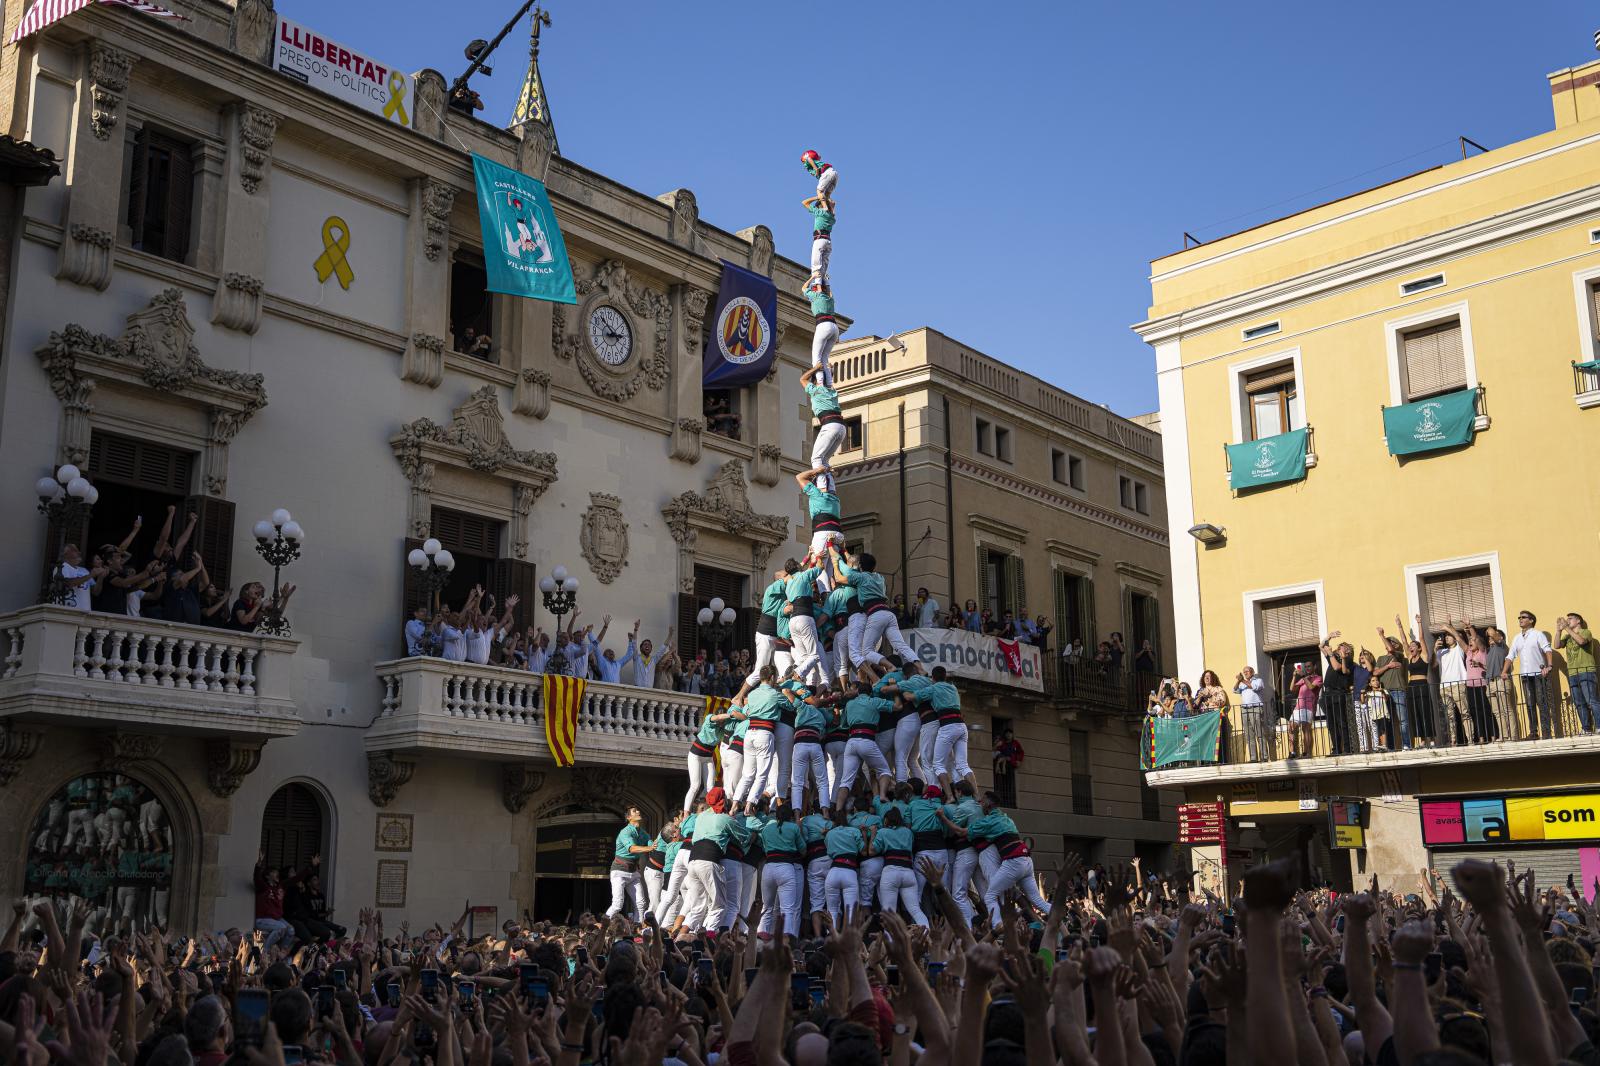 Image from DAILY NEWS - The Castellers of Vilafranca del Penedès load, for...